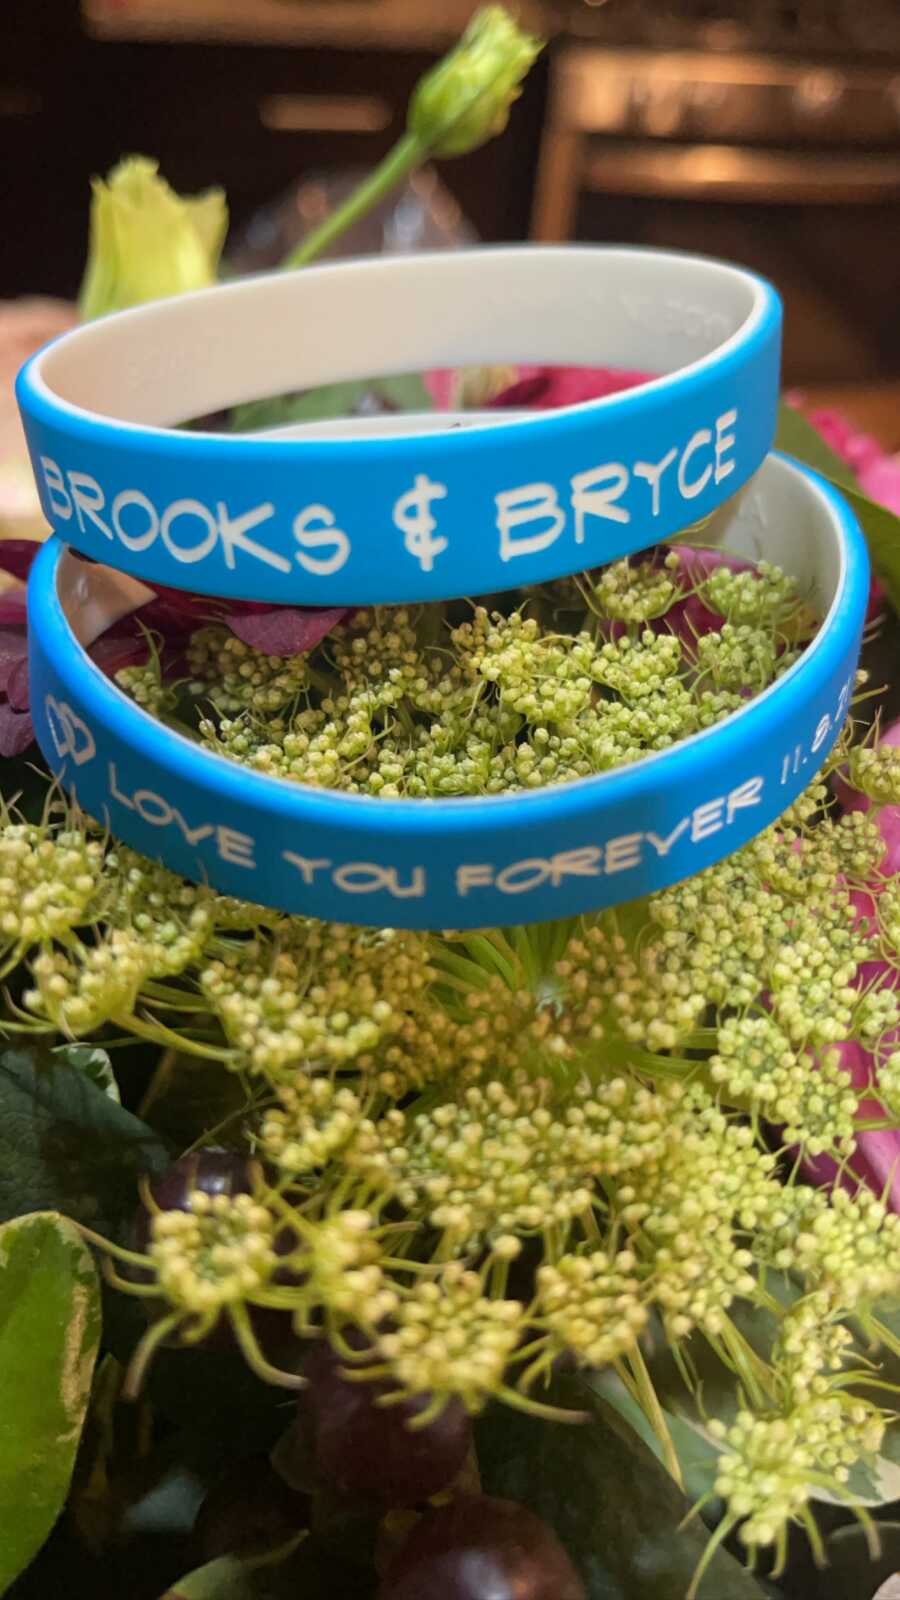 bracelets of the two twins who passed